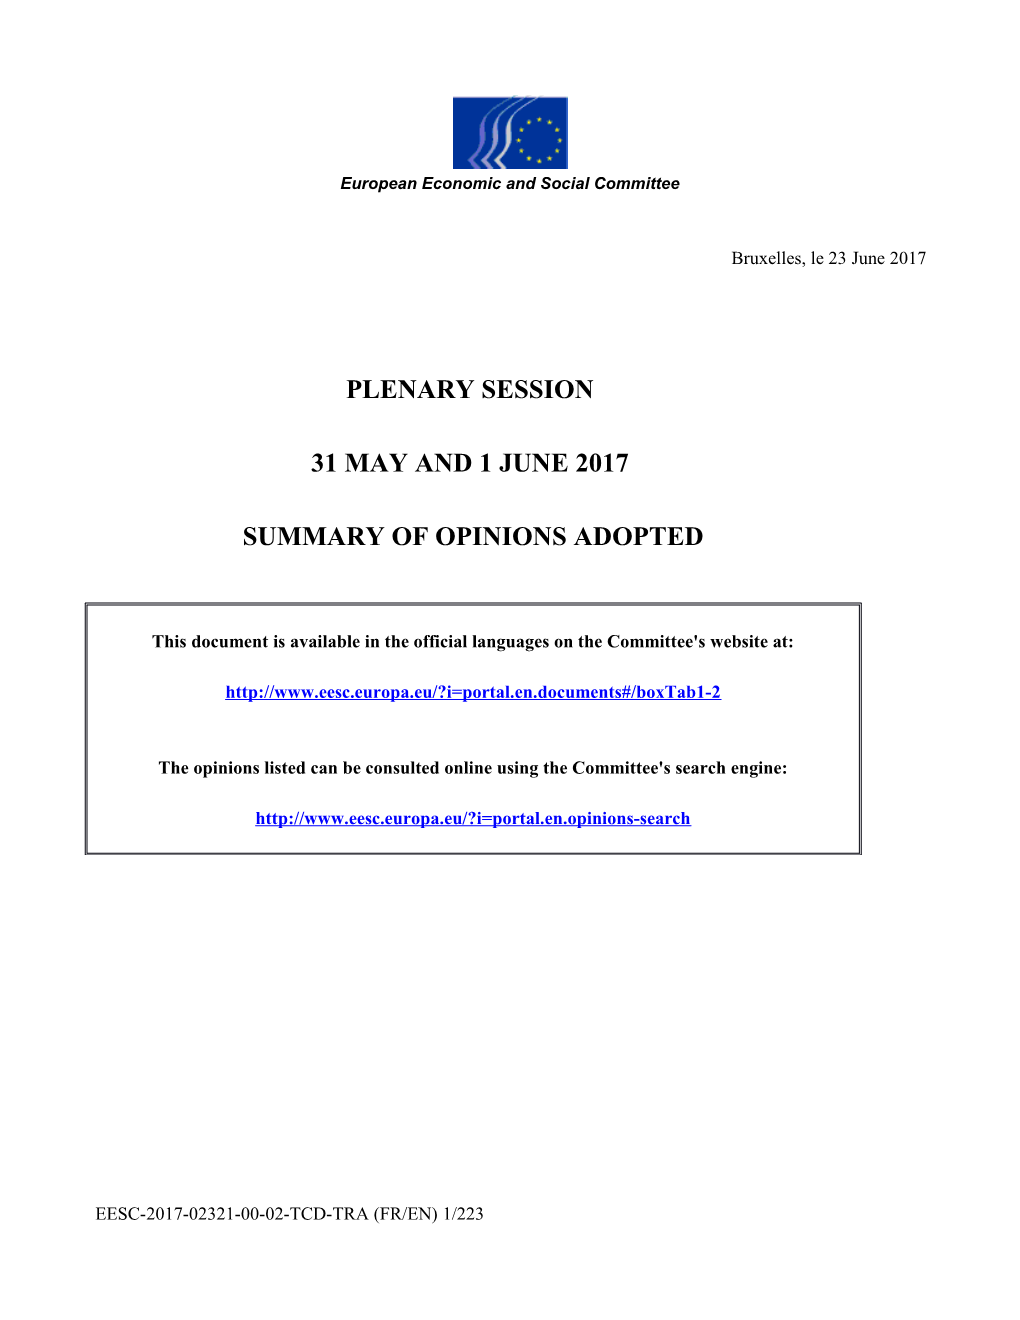 Summary of Opinions Adopted at the May-June 2017 Plenary Session